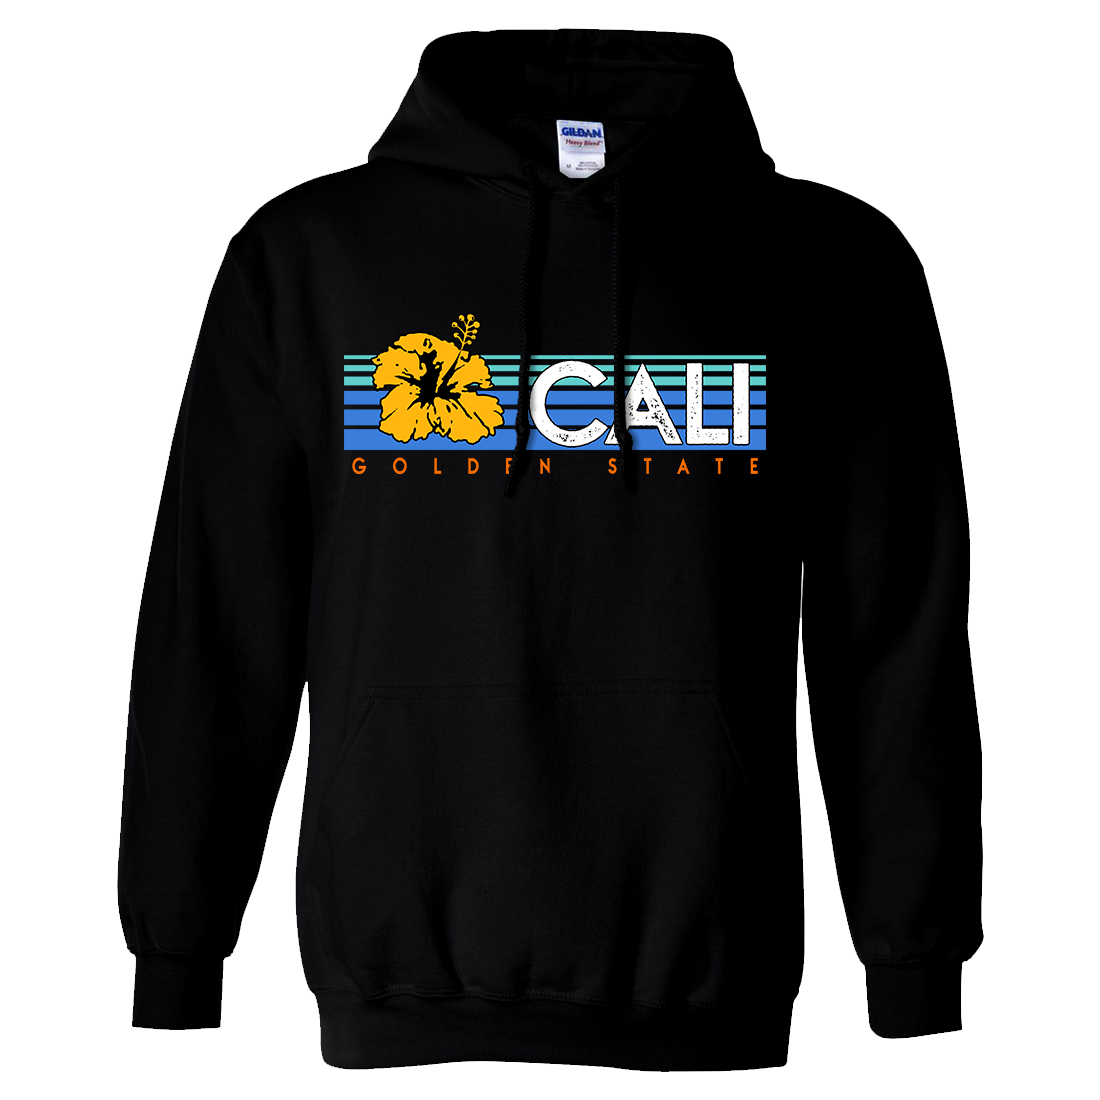 https://www.californiarepublicclothes.com/cdn/shop/products/Cali-Golden-State-Hibiscus-Hoodie-on-Black_9d13bcea-4cd0-48eb-a3a3-94c827ff03f0_2000x.png?v=1645209638